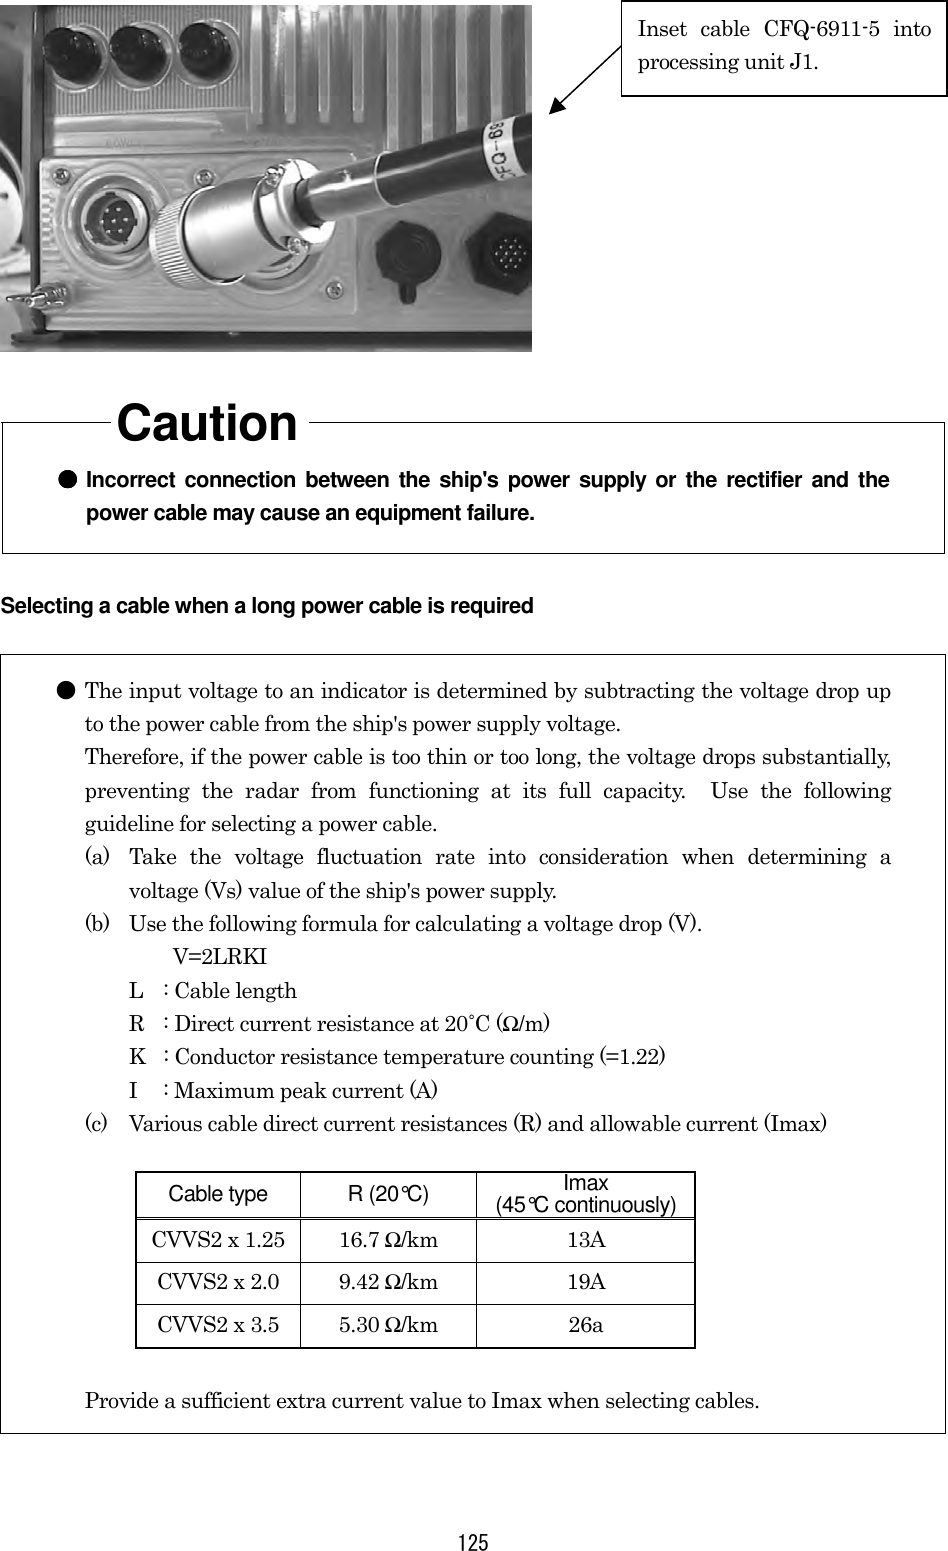  125     Caution  ●●●● Incorrect connection between the ship&apos;s power supply or the rectifier and the power cable may cause an equipment failure. Selecting a cable when a long power cable is required  ● The input voltage to an indicator is determined by subtracting the voltage drop up to the power cable from the ship&apos;s power supply voltage.       Therefore, if the power cable is too thin or too long, the voltage drops substantially, preventing the radar from functioning at its full capacity.  Use the following guideline for selecting a power cable. (a)  Take the voltage fluctuation rate into consideration when determining a voltage (Vs) value of the ship&apos;s power supply. (b)  Use the following formula for calculating a voltage drop (V).   V=2LRKI L  : Cable length R  : Direct current resistance at 20˚C (Ω/m) K  : Conductor resistance temperature counting (=1.22) I  : Maximum peak current (A) (c)  Various cable direct current resistances (R) and allowable current (Imax)  Cable type  R (20°C)  Imax (45°C continuously) CVVS2 x 1.25  16.7 Ω/km 13A CVVS2 x 2.0  9.42 Ω/km 19A CVVS2 x 3.5  5.30 Ω/km 26a  Provide a sufficient extra current value to Imax when selecting cables. Inset cable CFQ-6911-5 intoprocessing unit J1. 